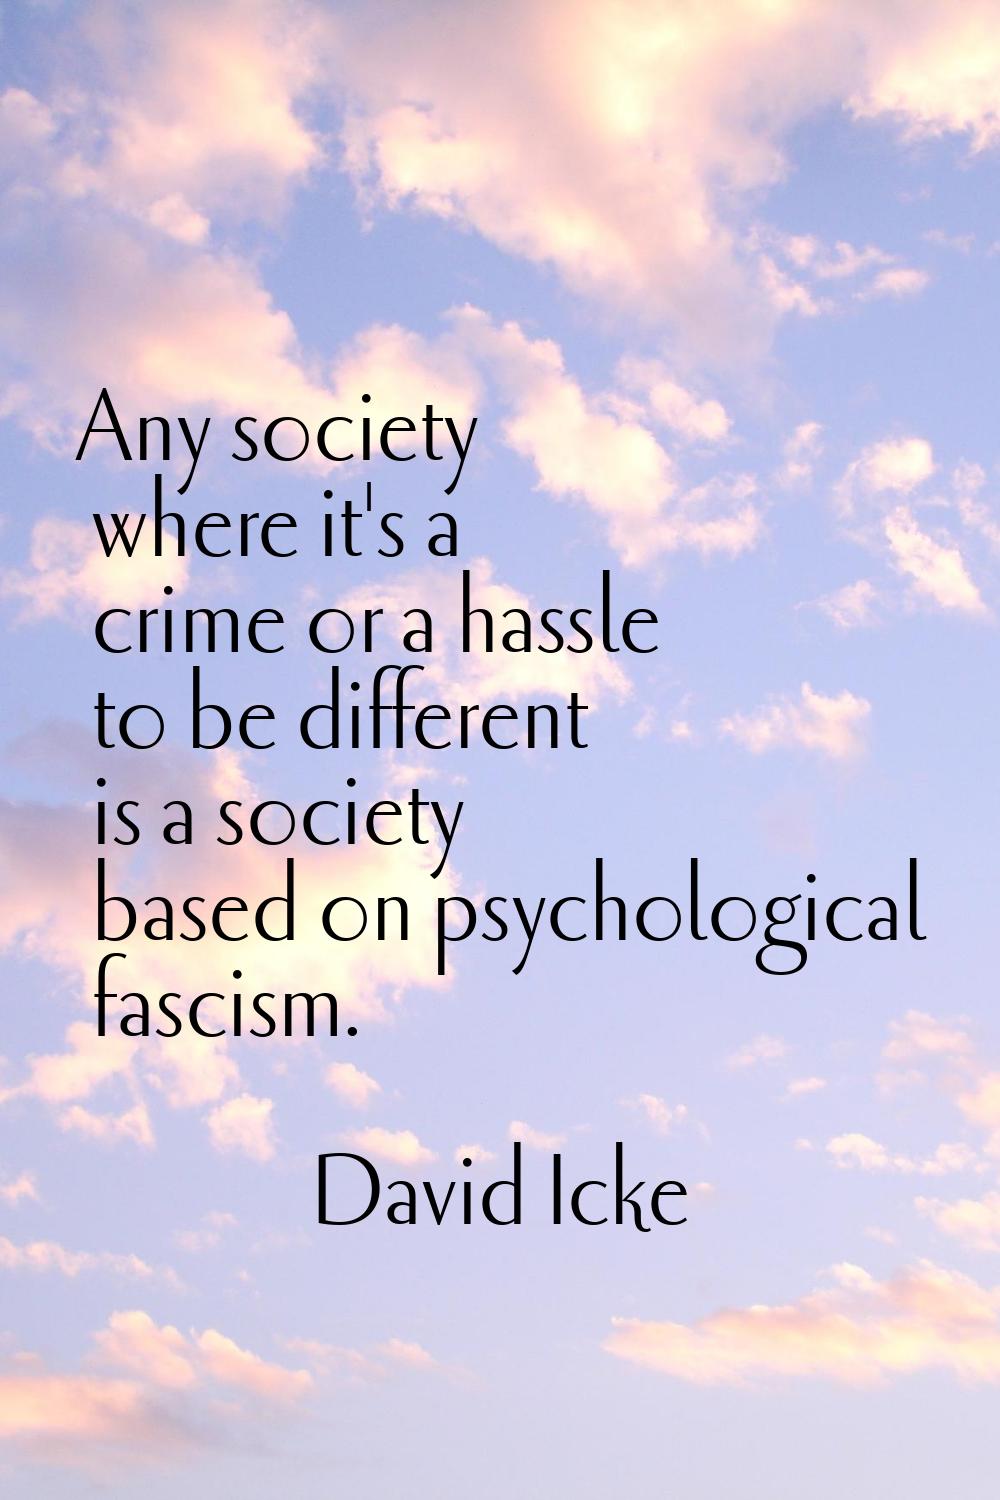 Any society where it's a crime or a hassle to be different is a society based on psychological fasc